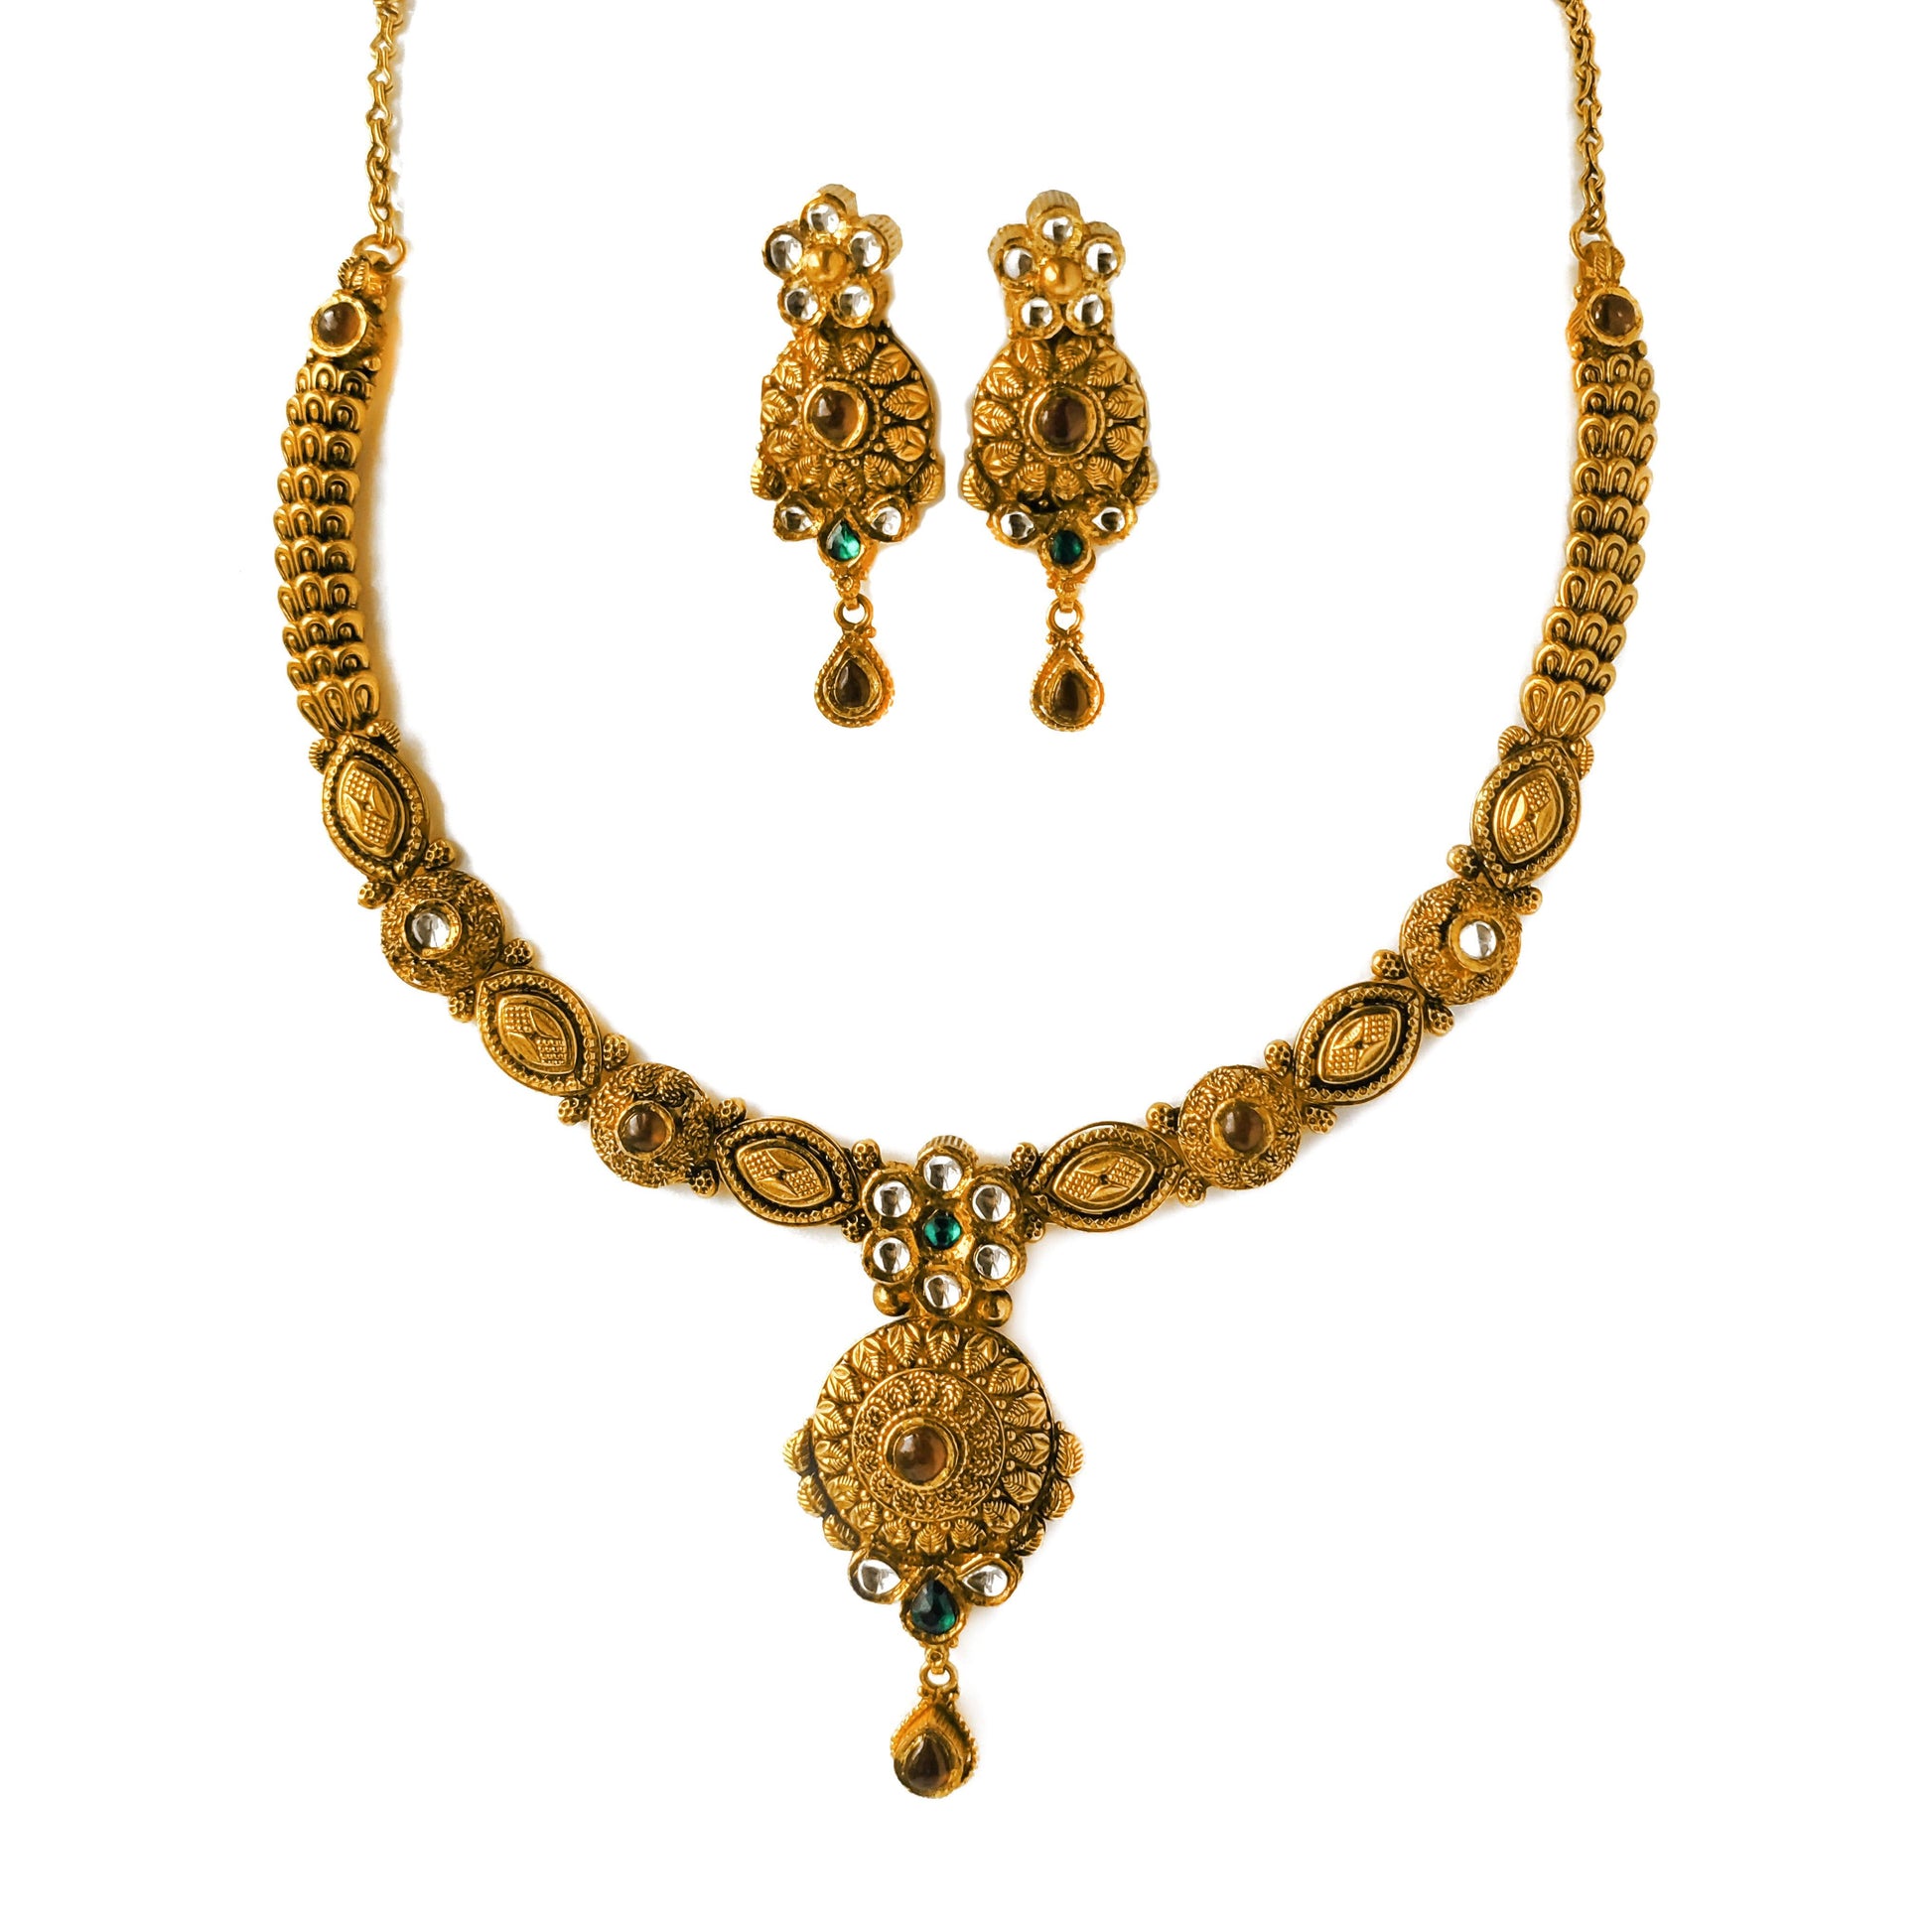 22ct Gold Antiquated Look Necklace set with Green, Red and White Polki Style Cubic Zirconia Stones (48.3g) N&E-8205 - Minar Jewellers